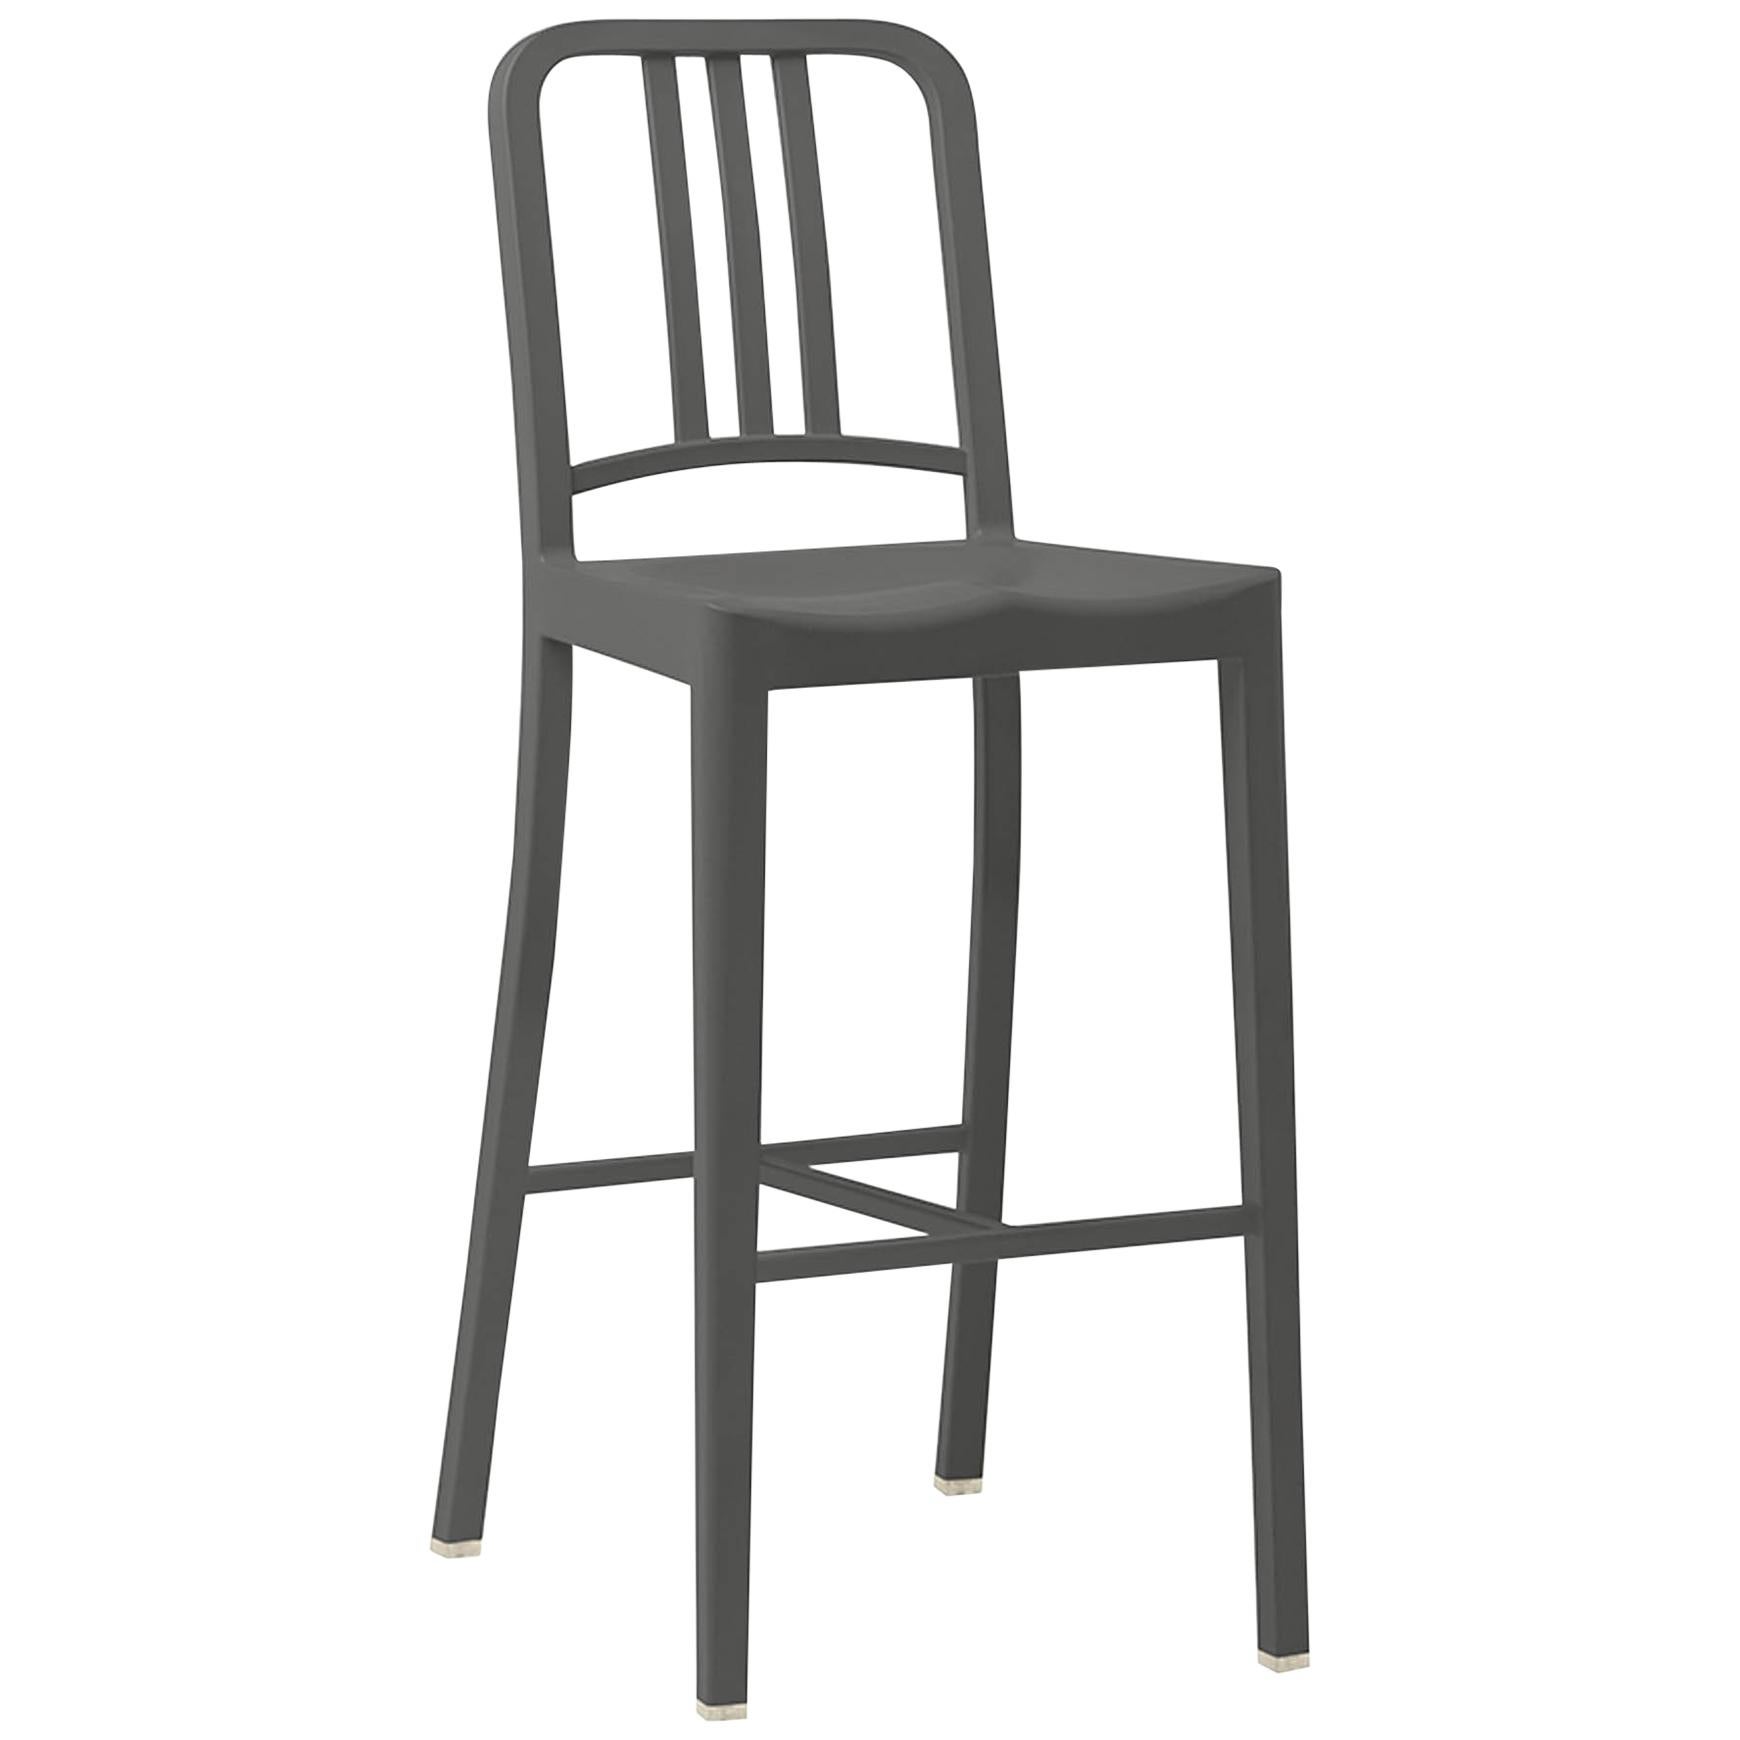 Emeco 111 Navy Barstool in Charcoal by Coca-Cola